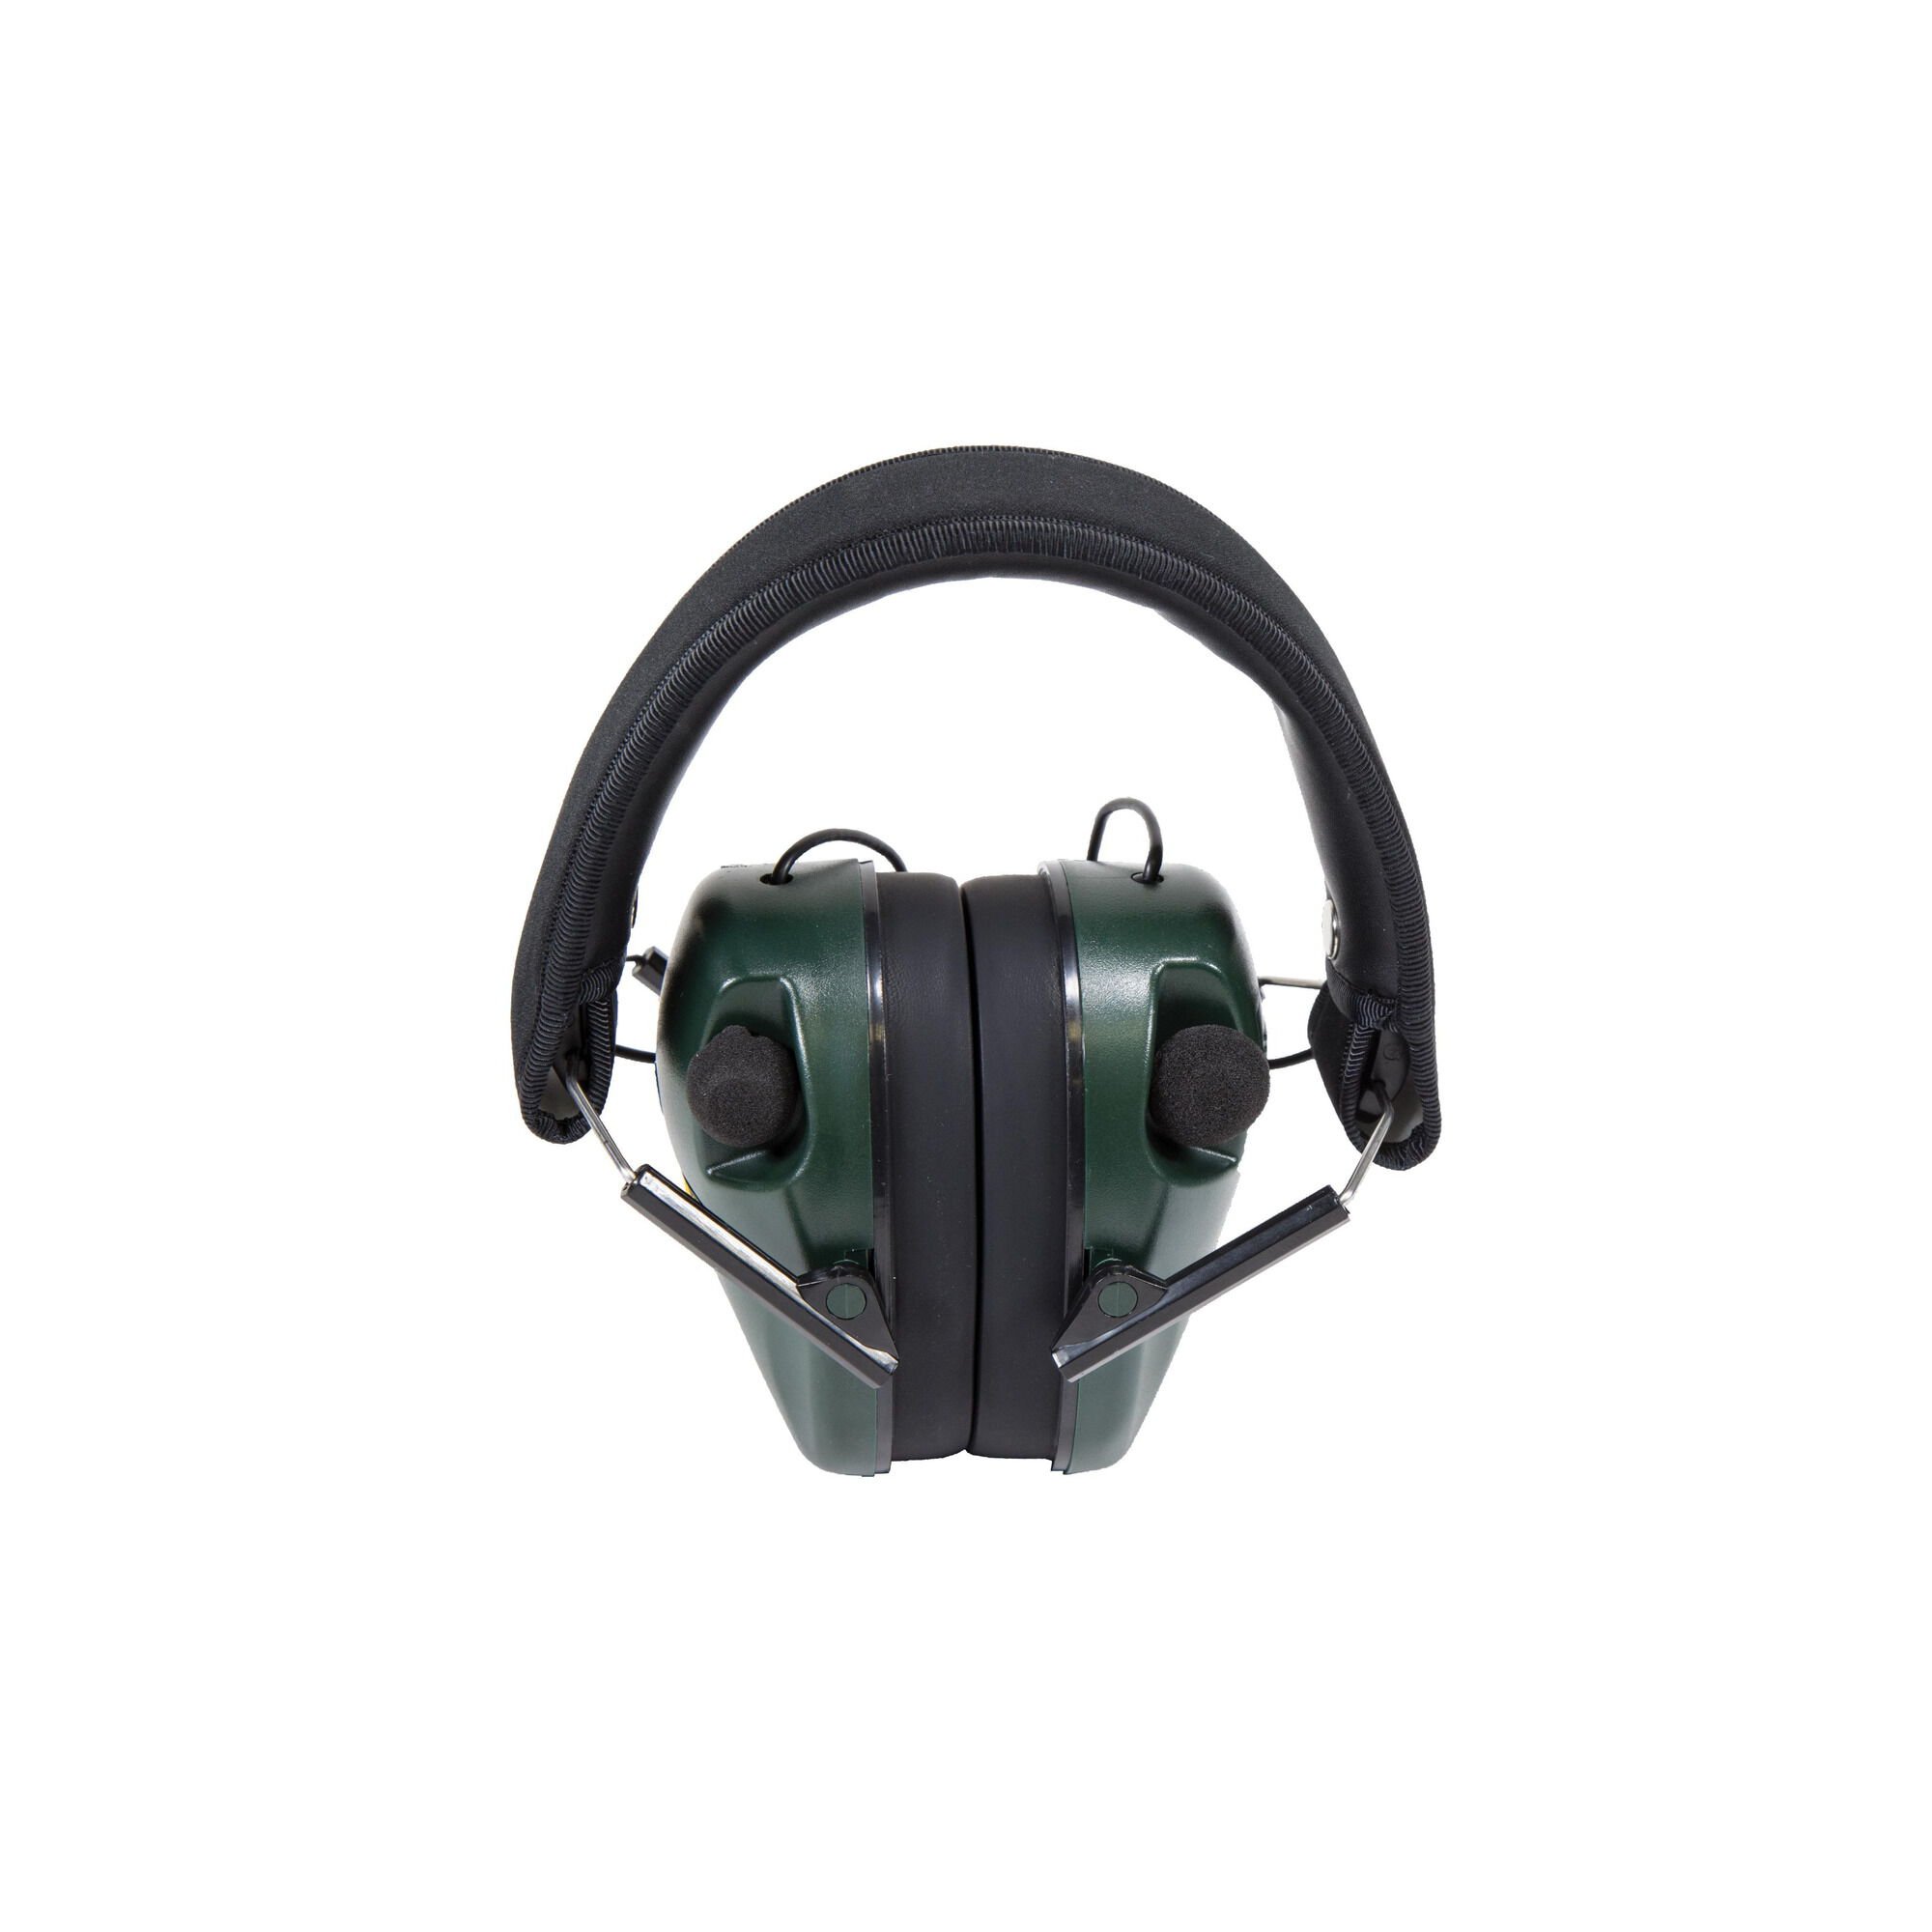 Caldwell E-Max Electronic Hearing Protection Low-Profile Ear Muffs 487557 